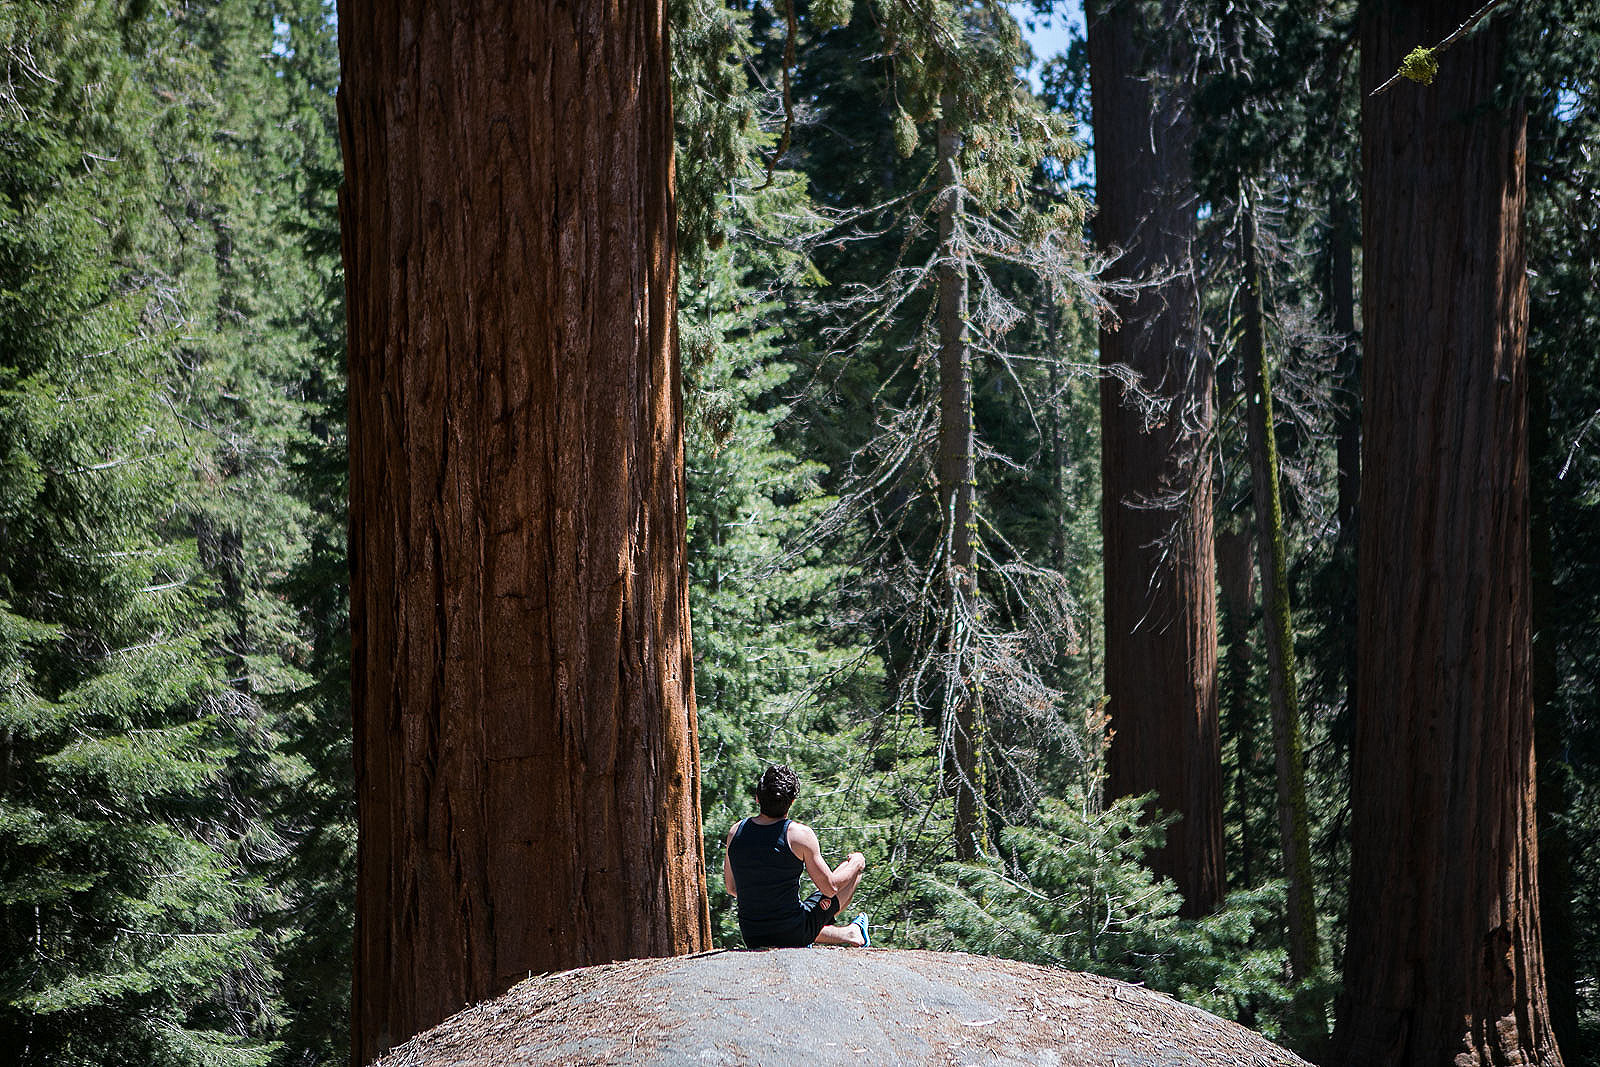 One Day in Kings Canyon and Sequoia National Parks: Where to Go & What to See